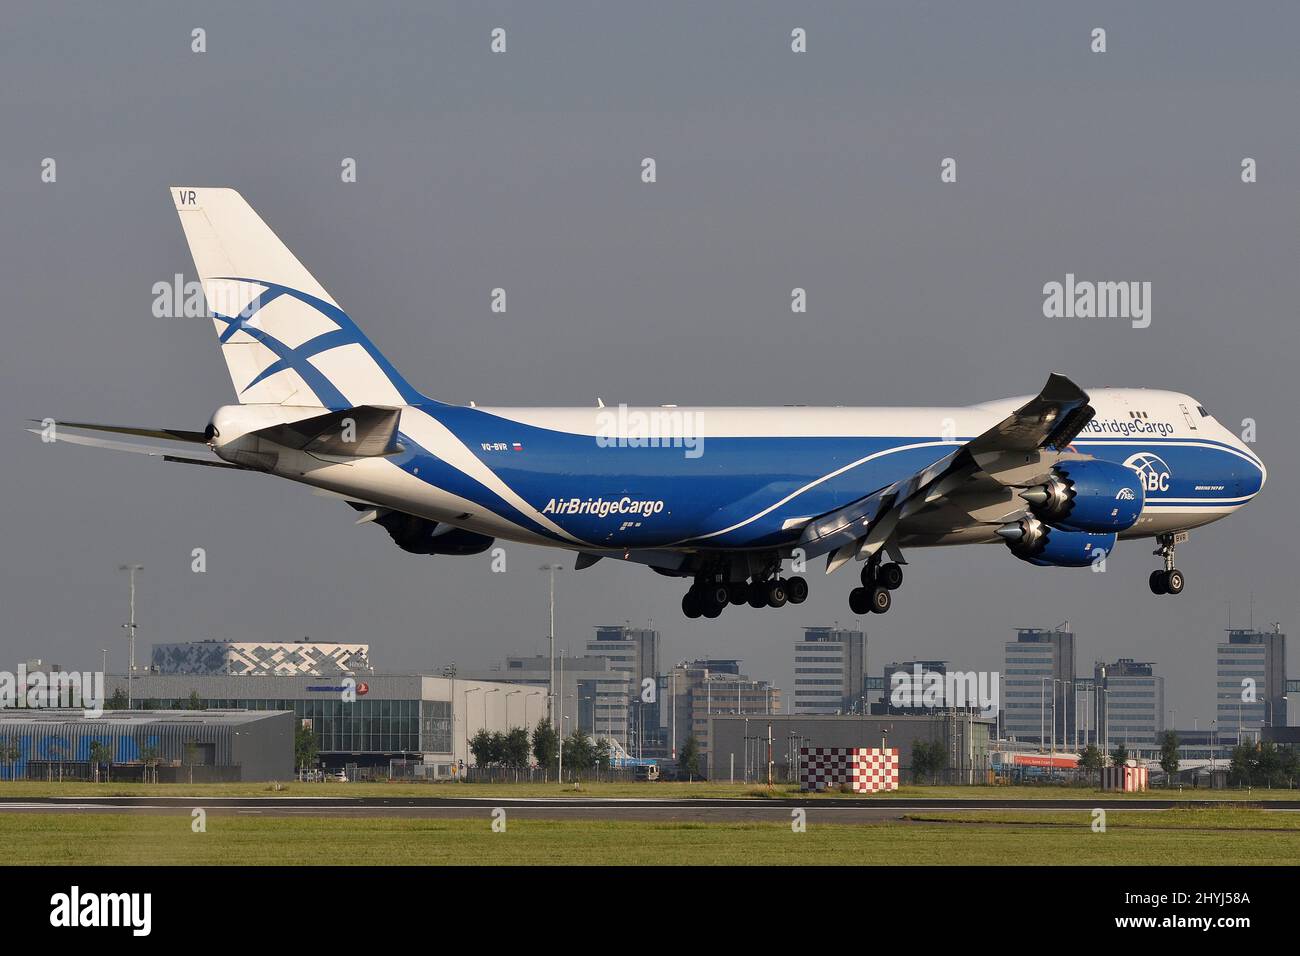 SANCTIONS - FOLLOWING RUSSIAN INVASION OF UKRAINE AIR BRIDGE CARGO FORCED TO MOVE AIRCRAFT FROM BERMUDA TO RUSSIAN REGISTER. BOEING 747-8F VQ-BVR. Stock Photo